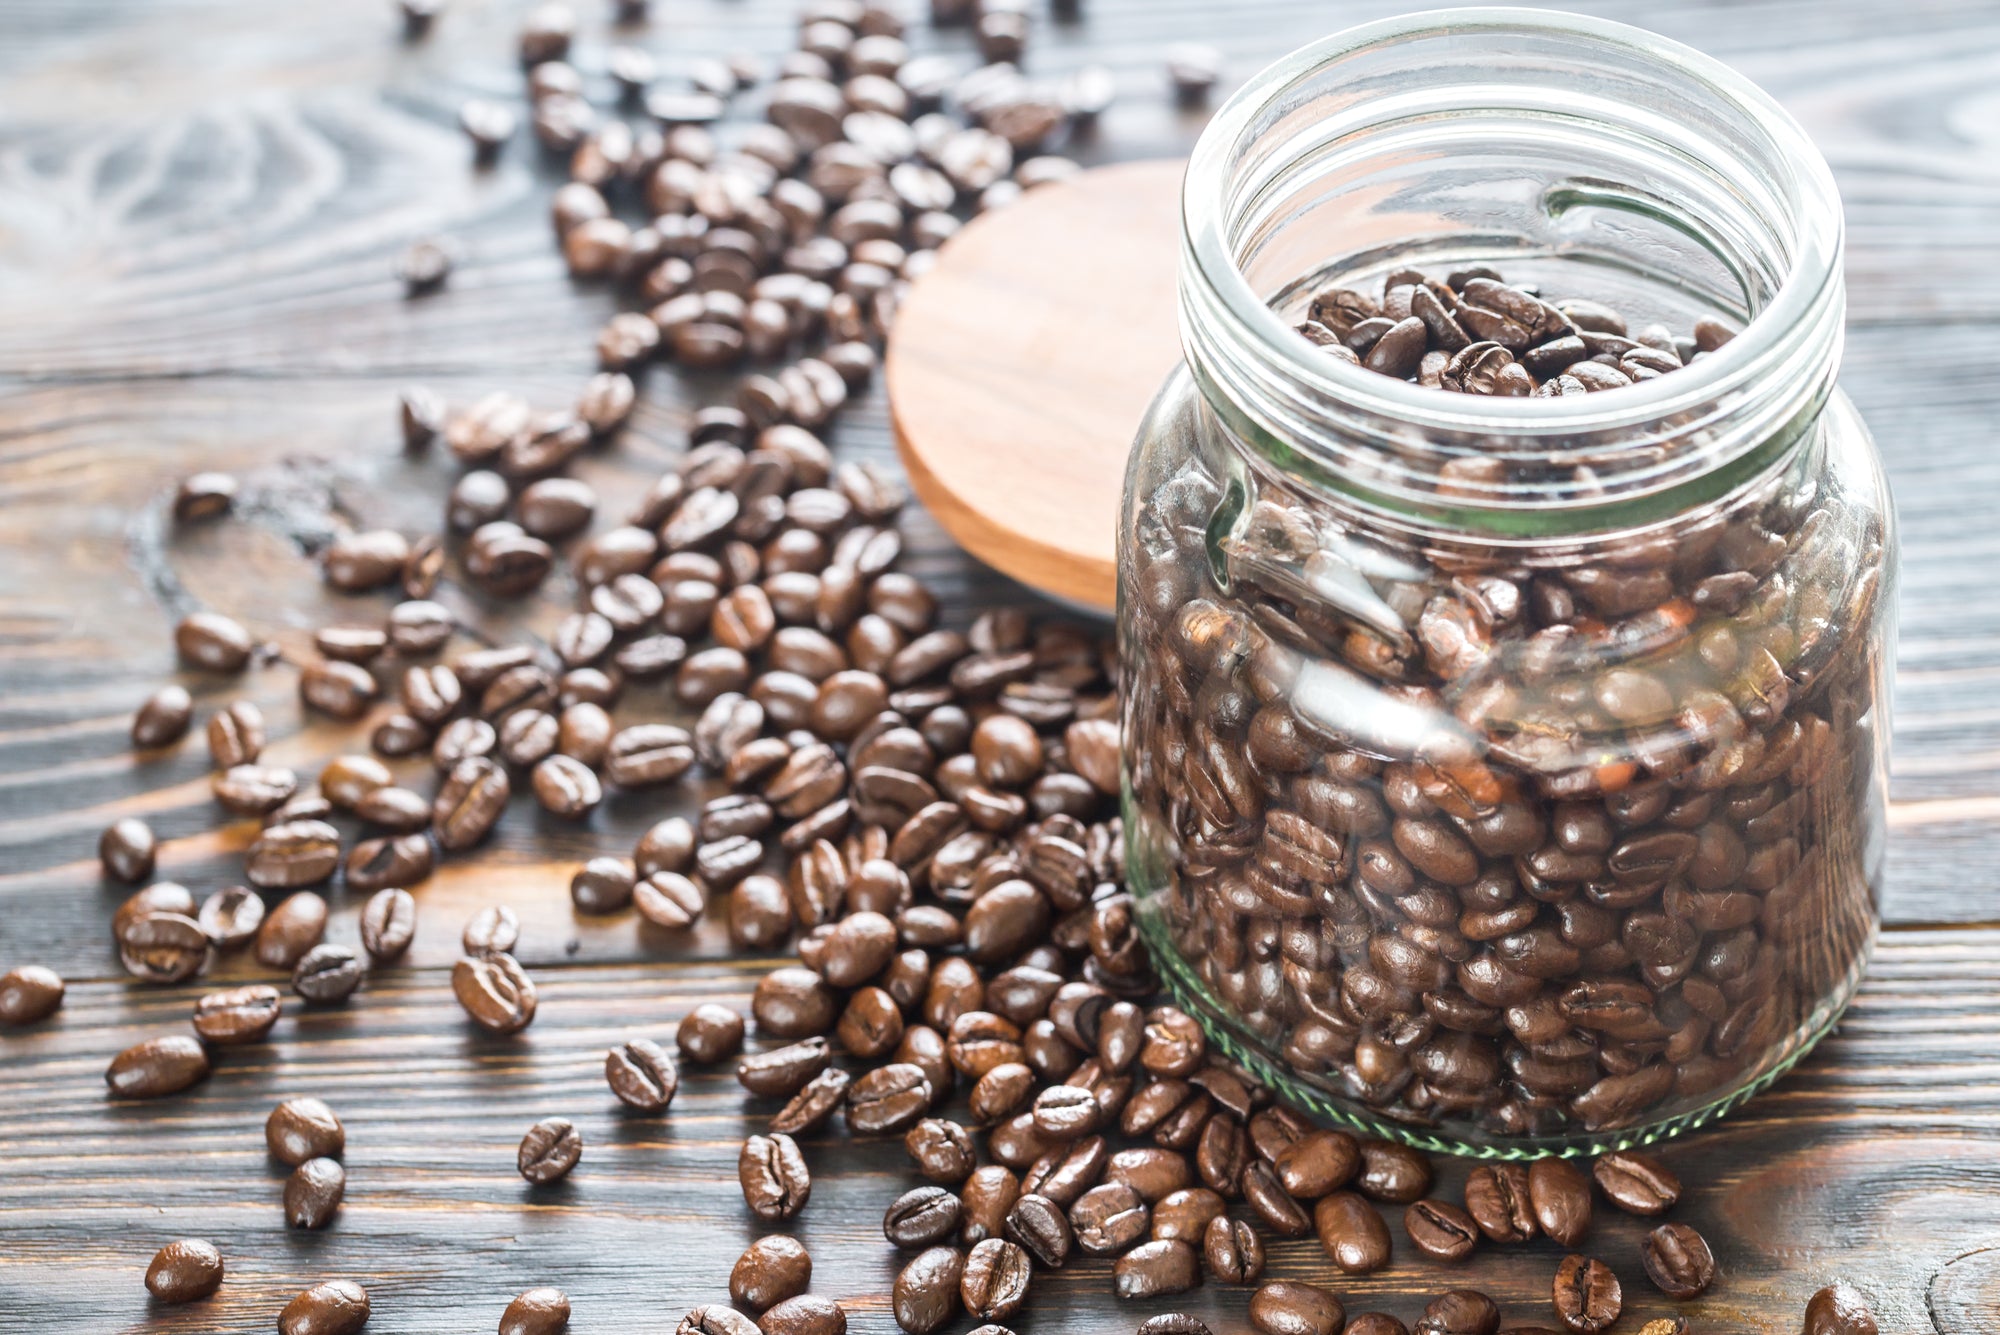 Should you store coffee in airtight container?